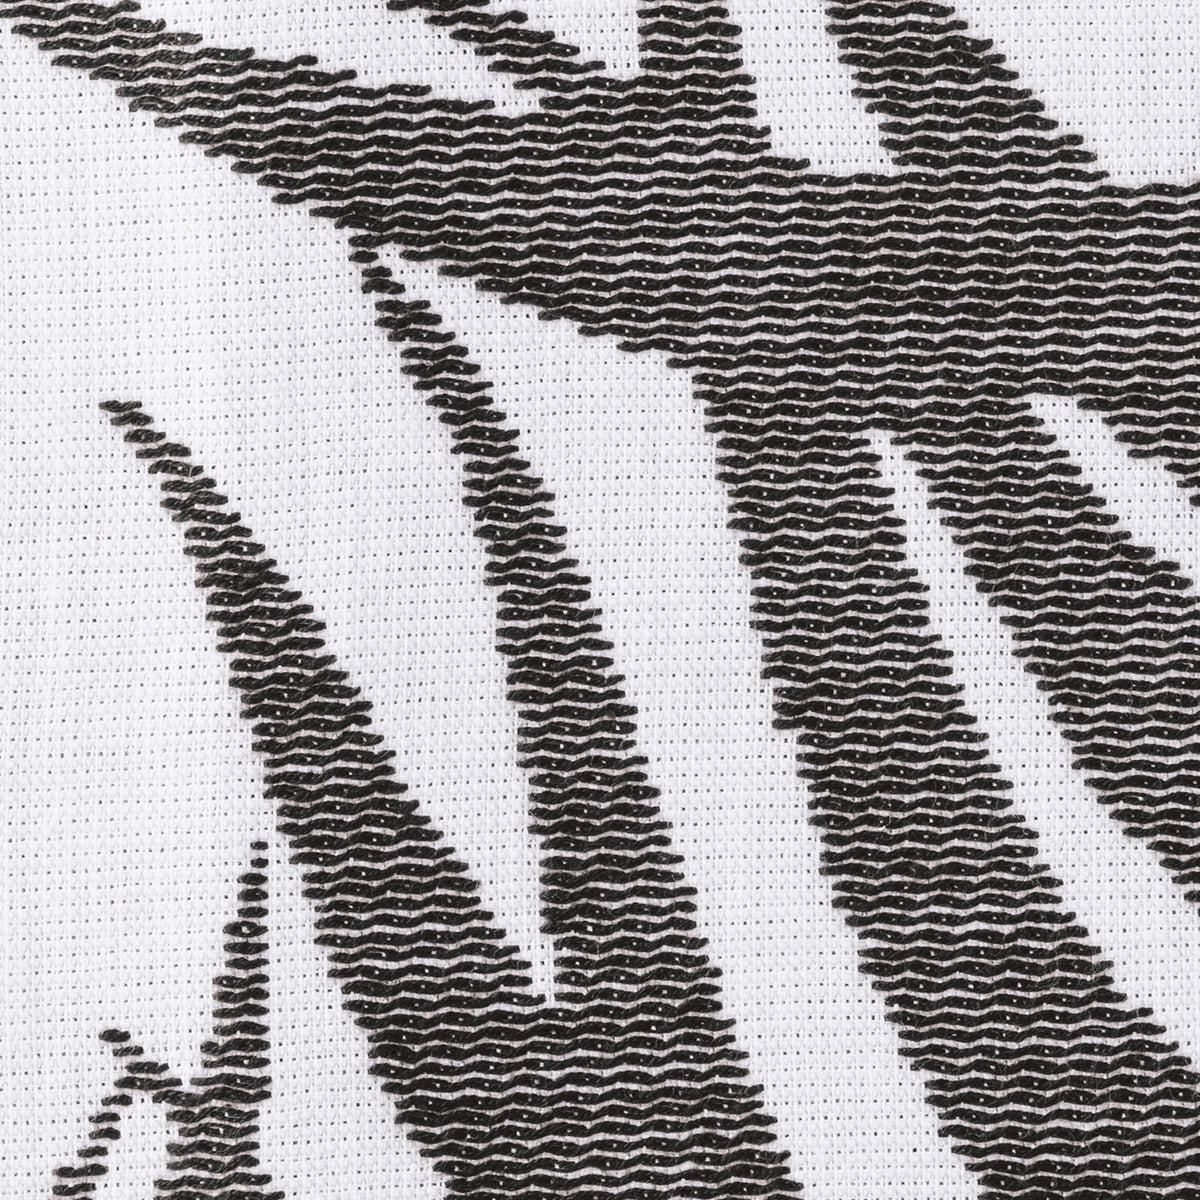 Swatch Sample of Matouk Zebra Palm Beach Towels in Color Sand Black